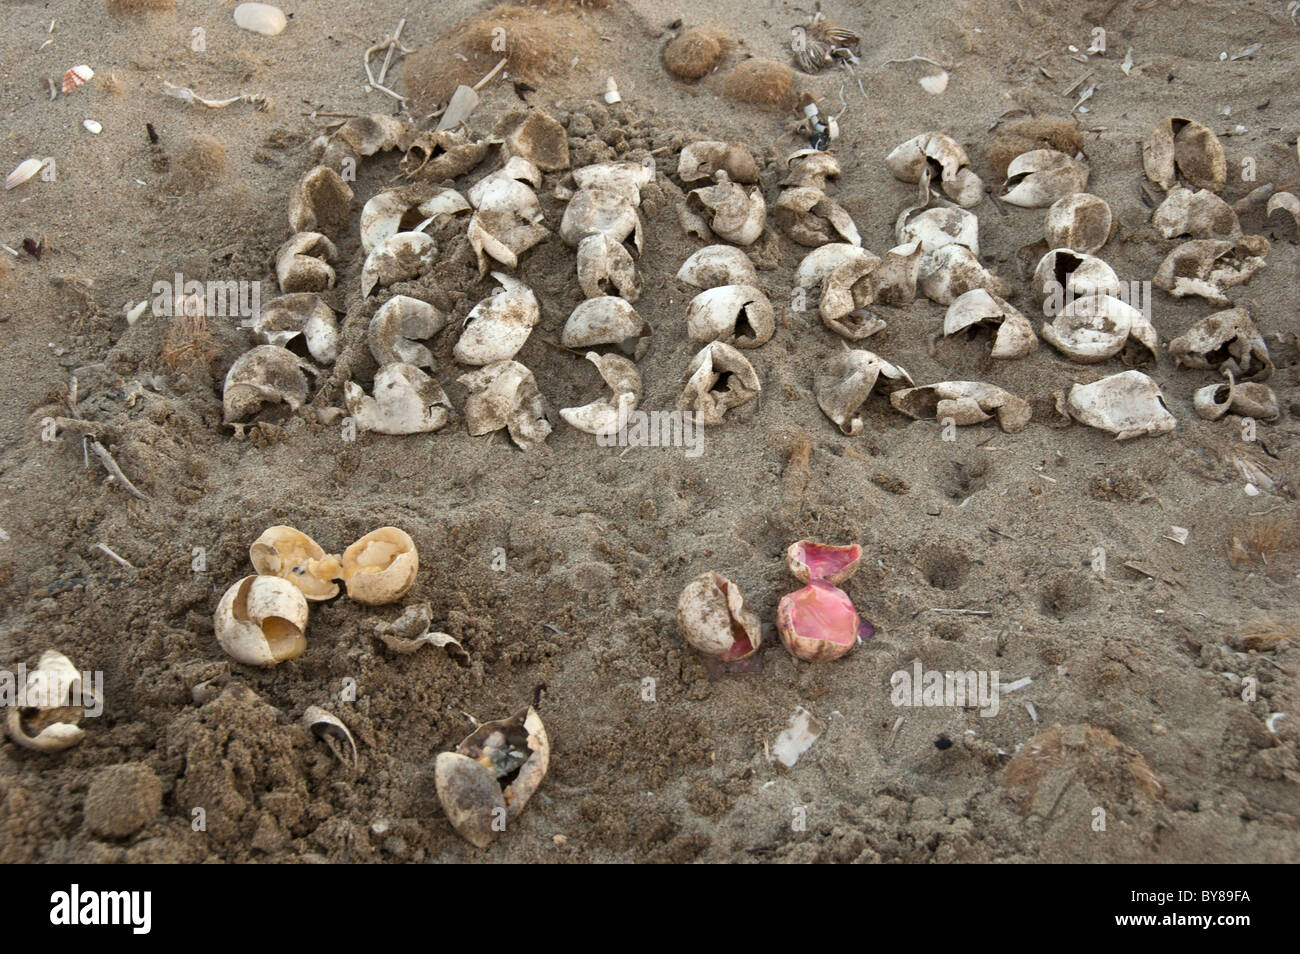 Loggerhead turtle egg shells excavated by conservation volunteers from a beach nest Stock Photo